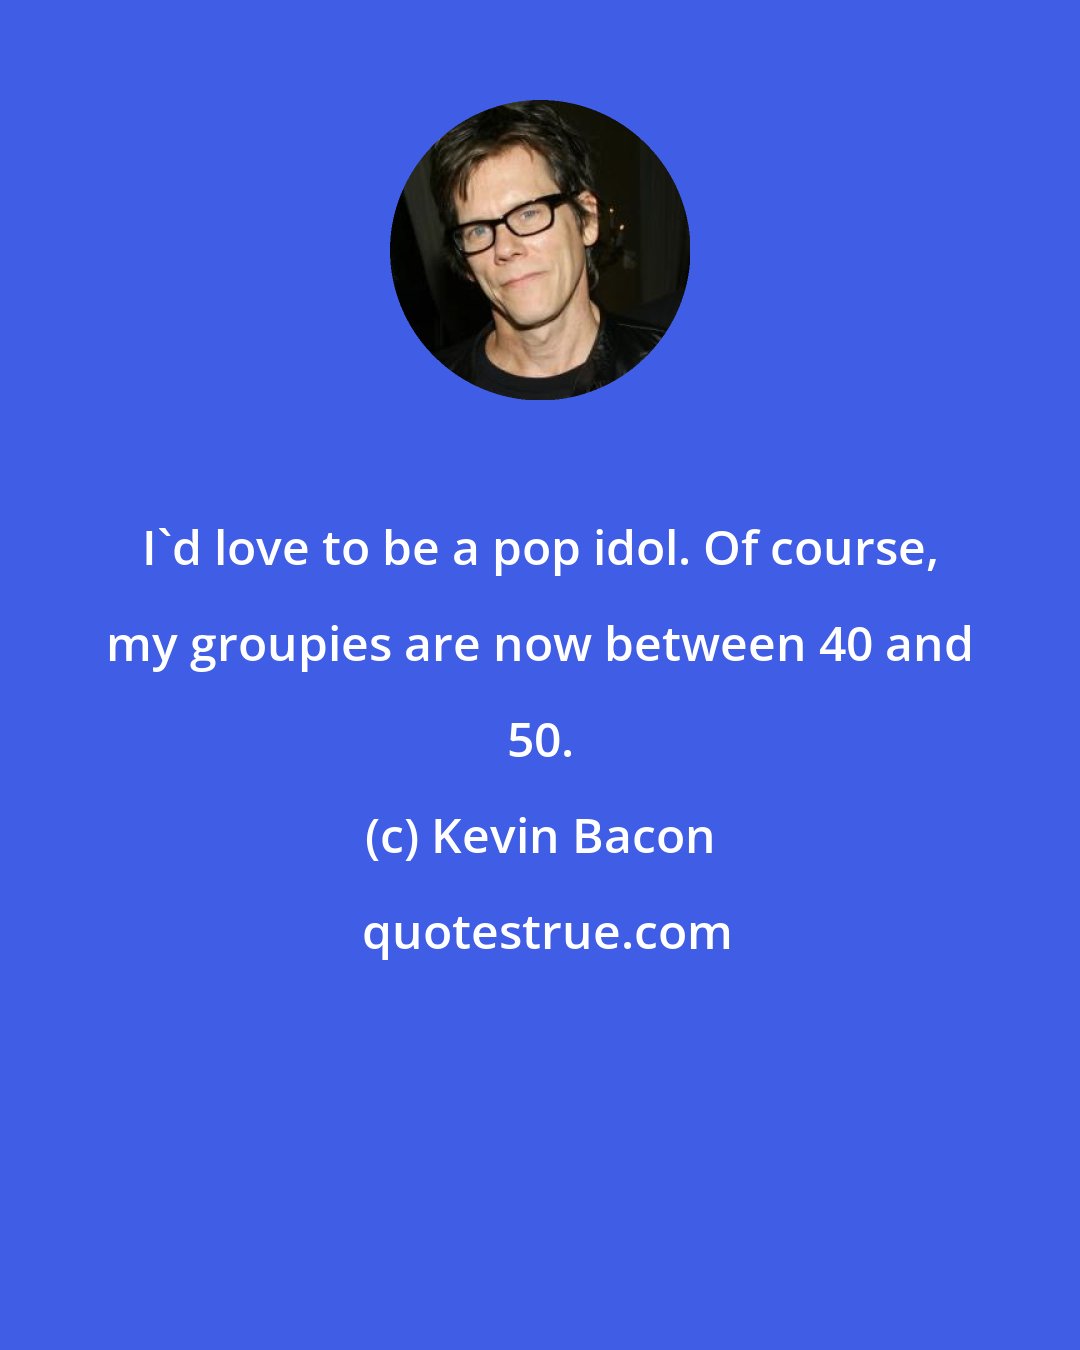 Kevin Bacon: I'd love to be a pop idol. Of course, my groupies are now between 40 and 50.